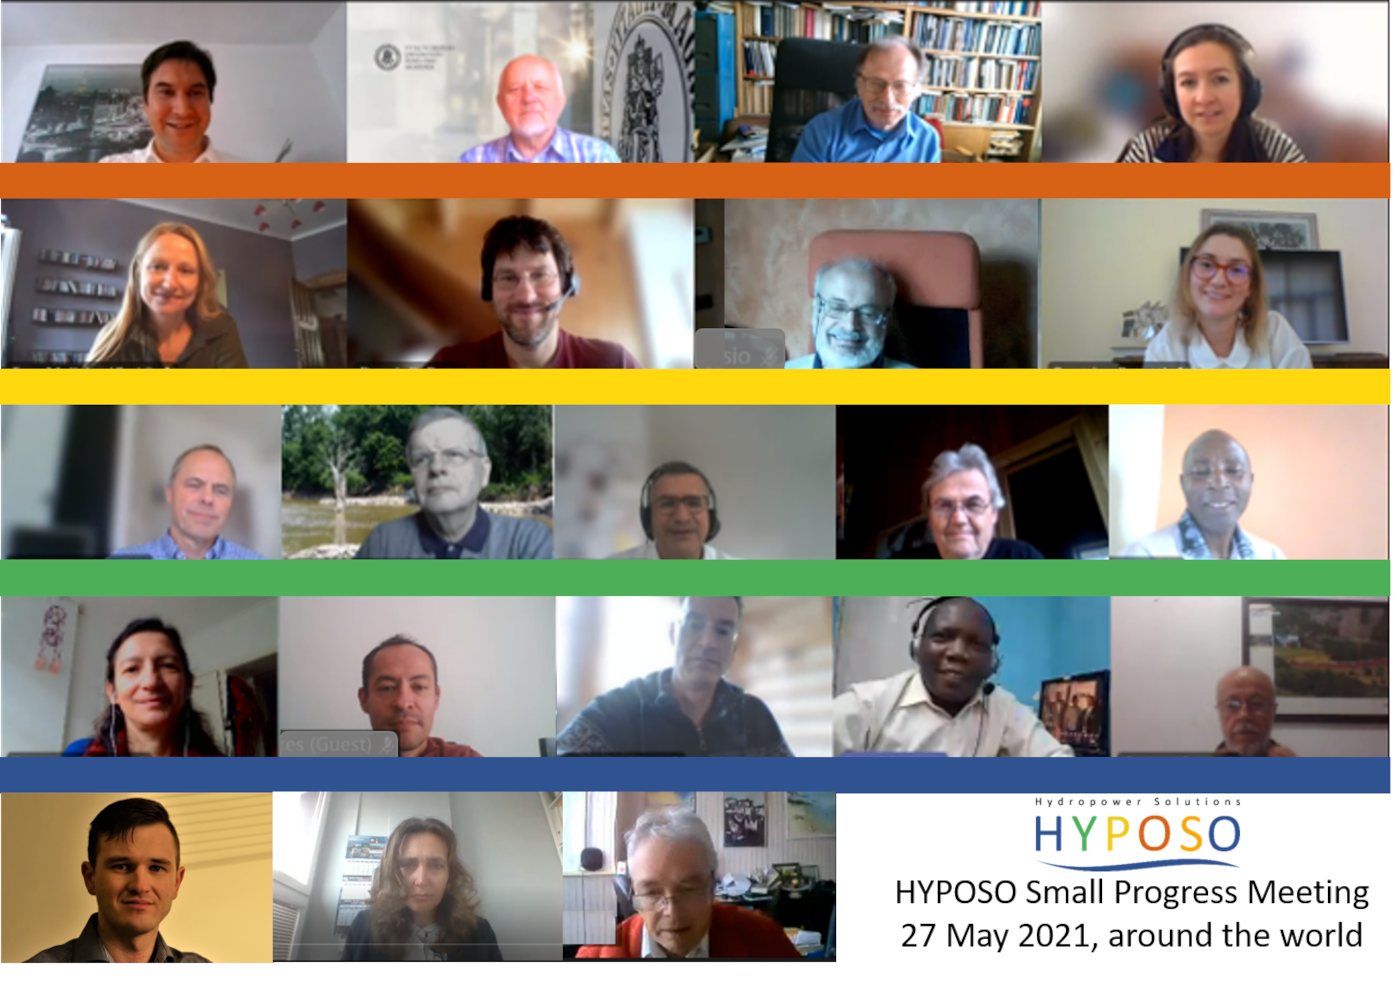 HYPOSO - participants of the small progress meeting